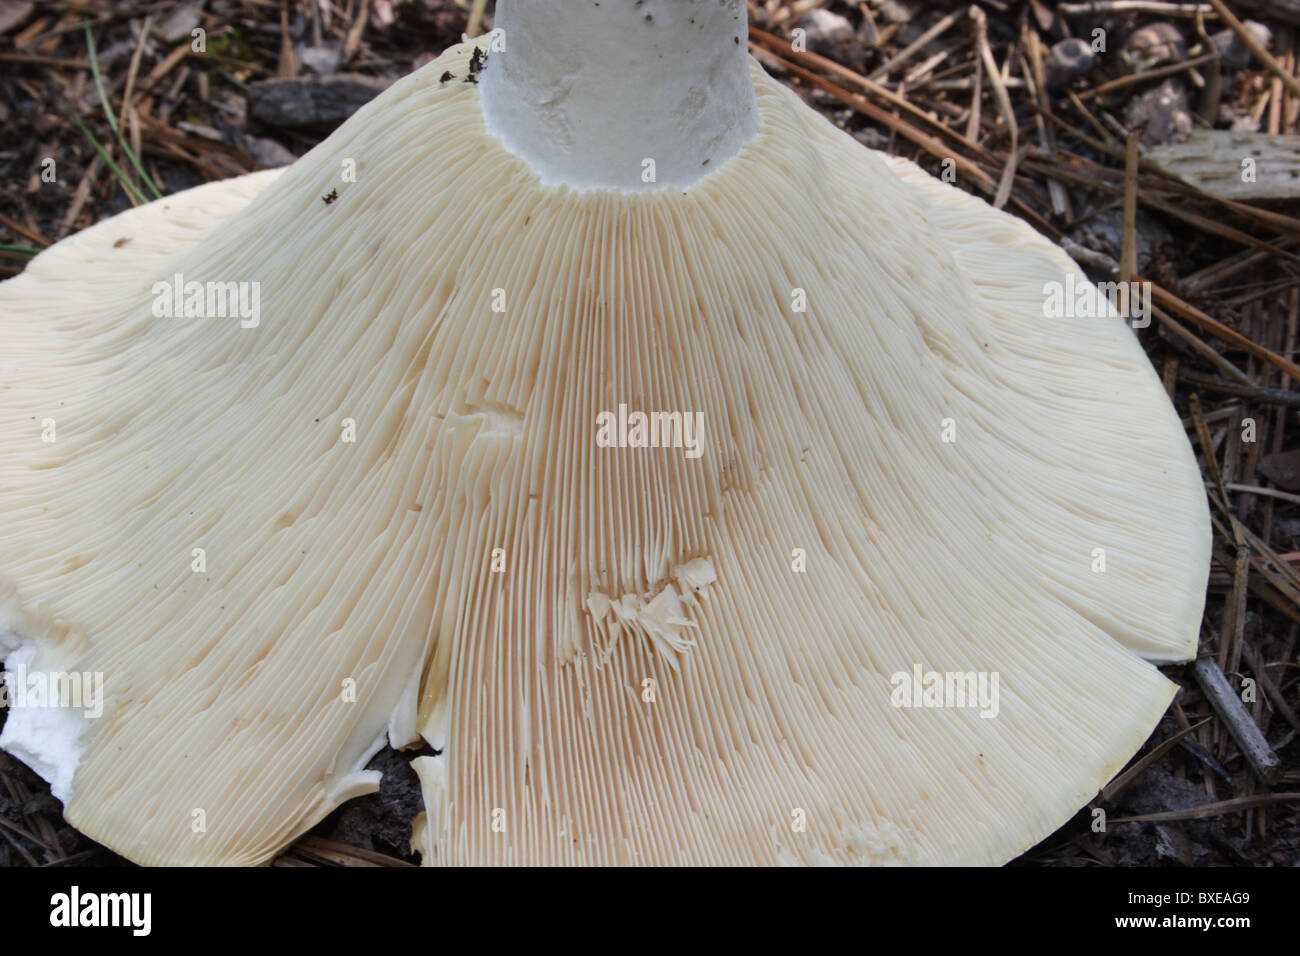 Giant Clitocybe mushroom found growing in pine forest. Midlothian, Virginia Stock Photo